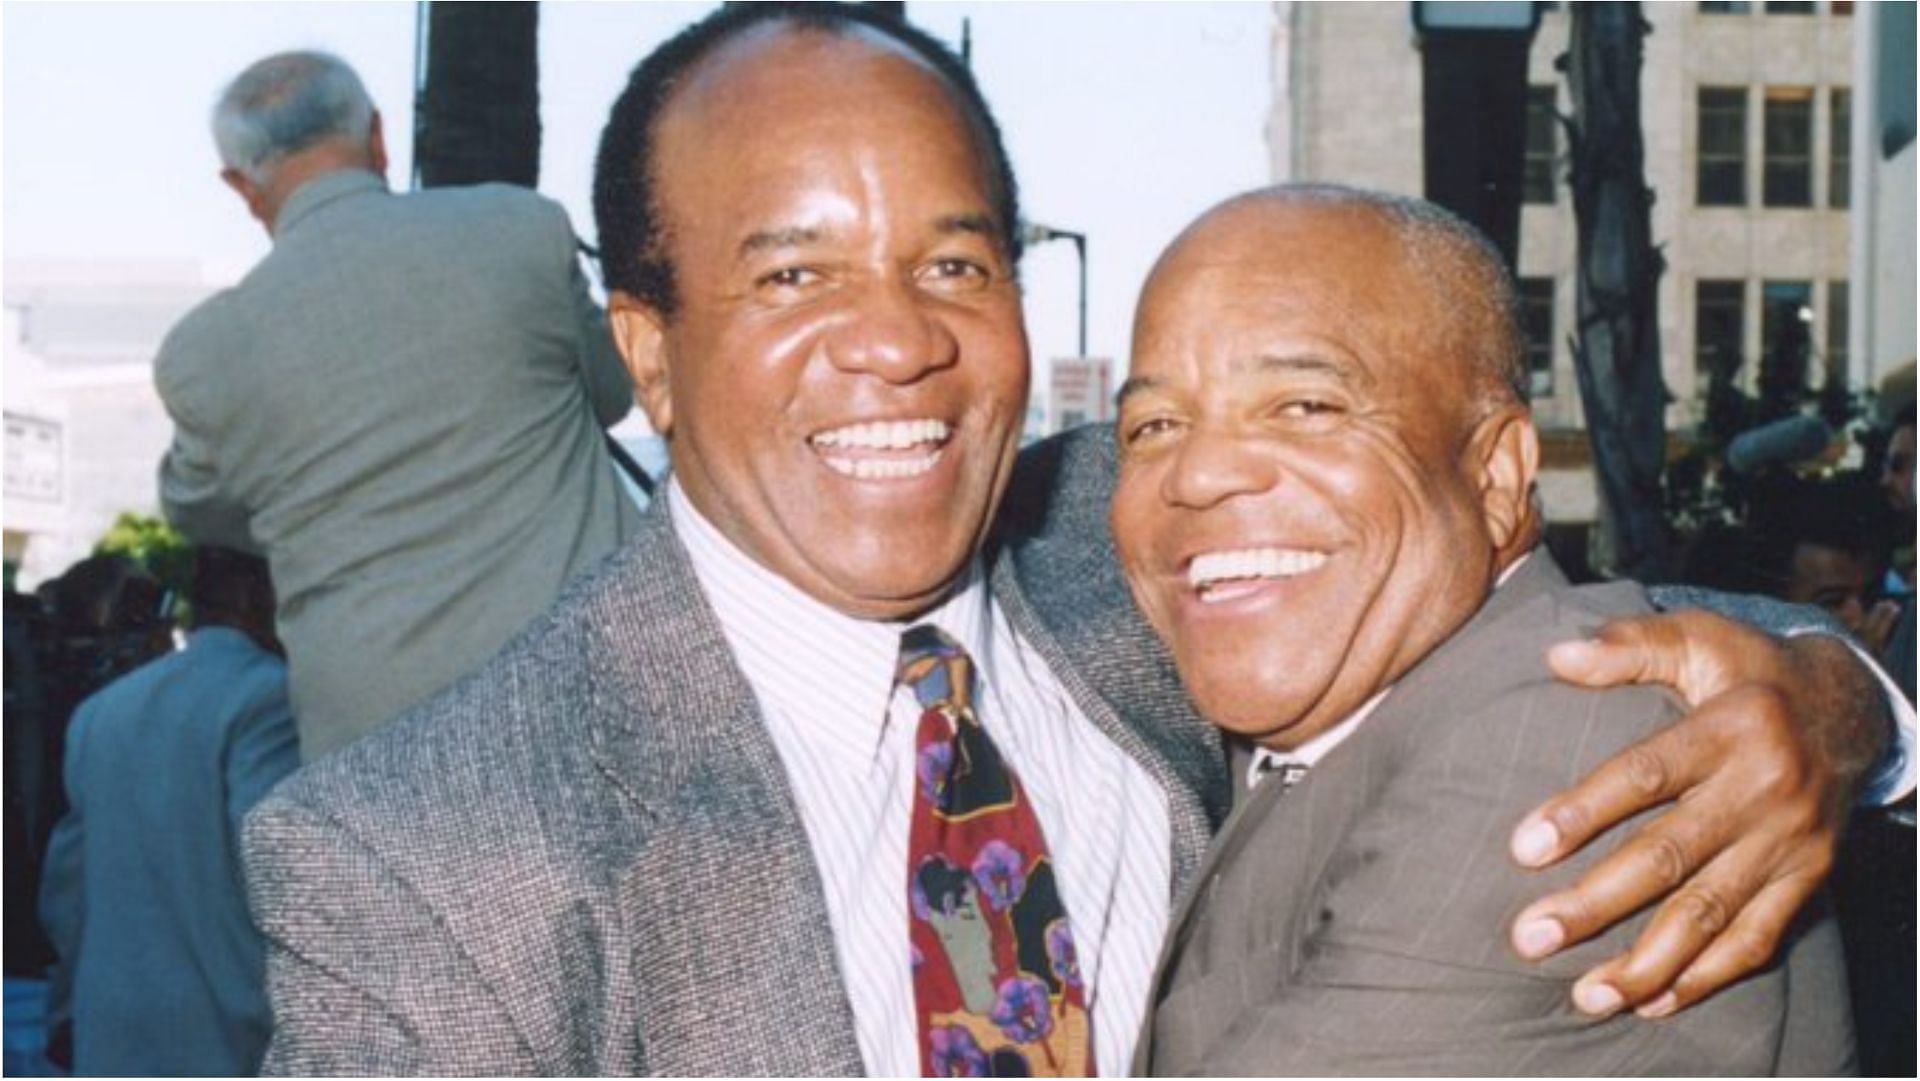 Berry Gordy paid tribute to his younger brother Robert, who died at the age of 91 (Image via PrincewillEgim/Twitter)